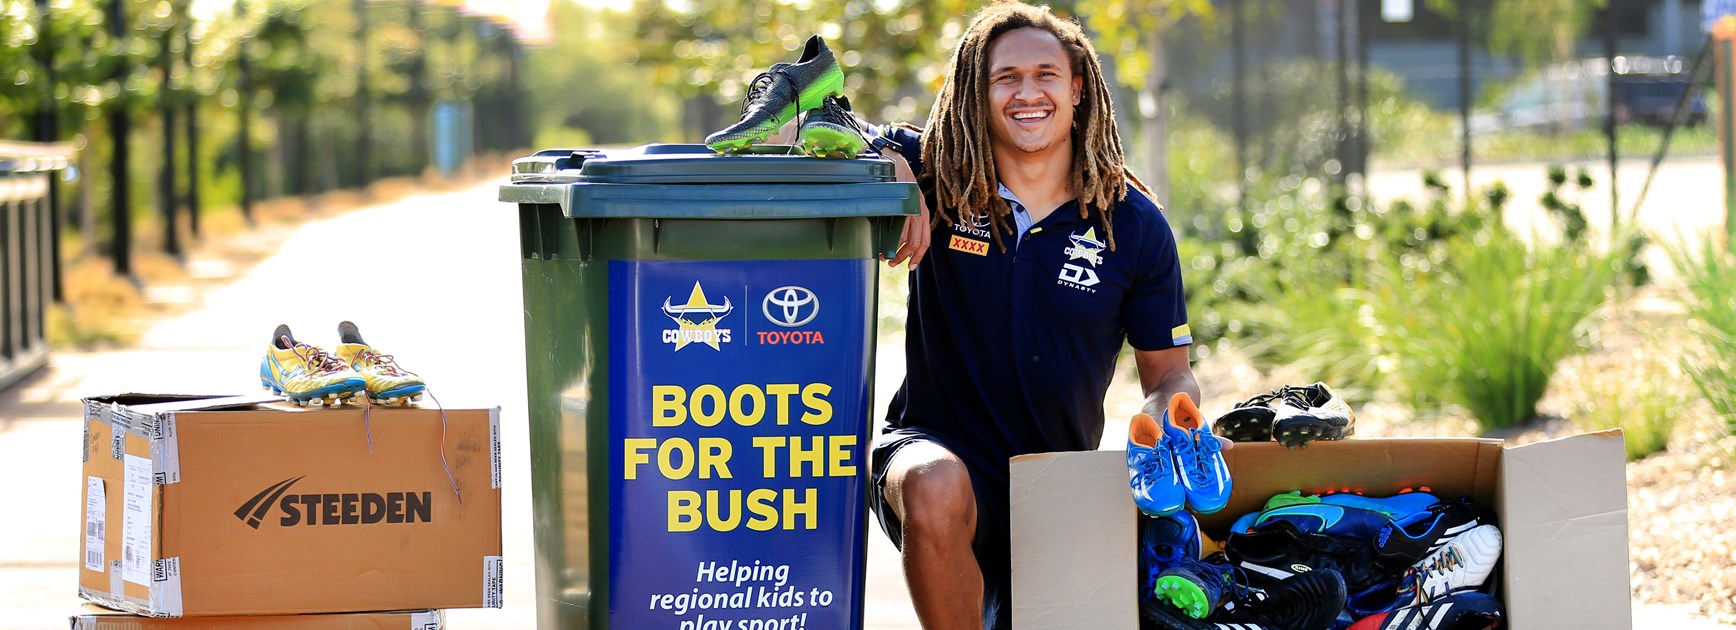 Bush benefits from footy boot donation